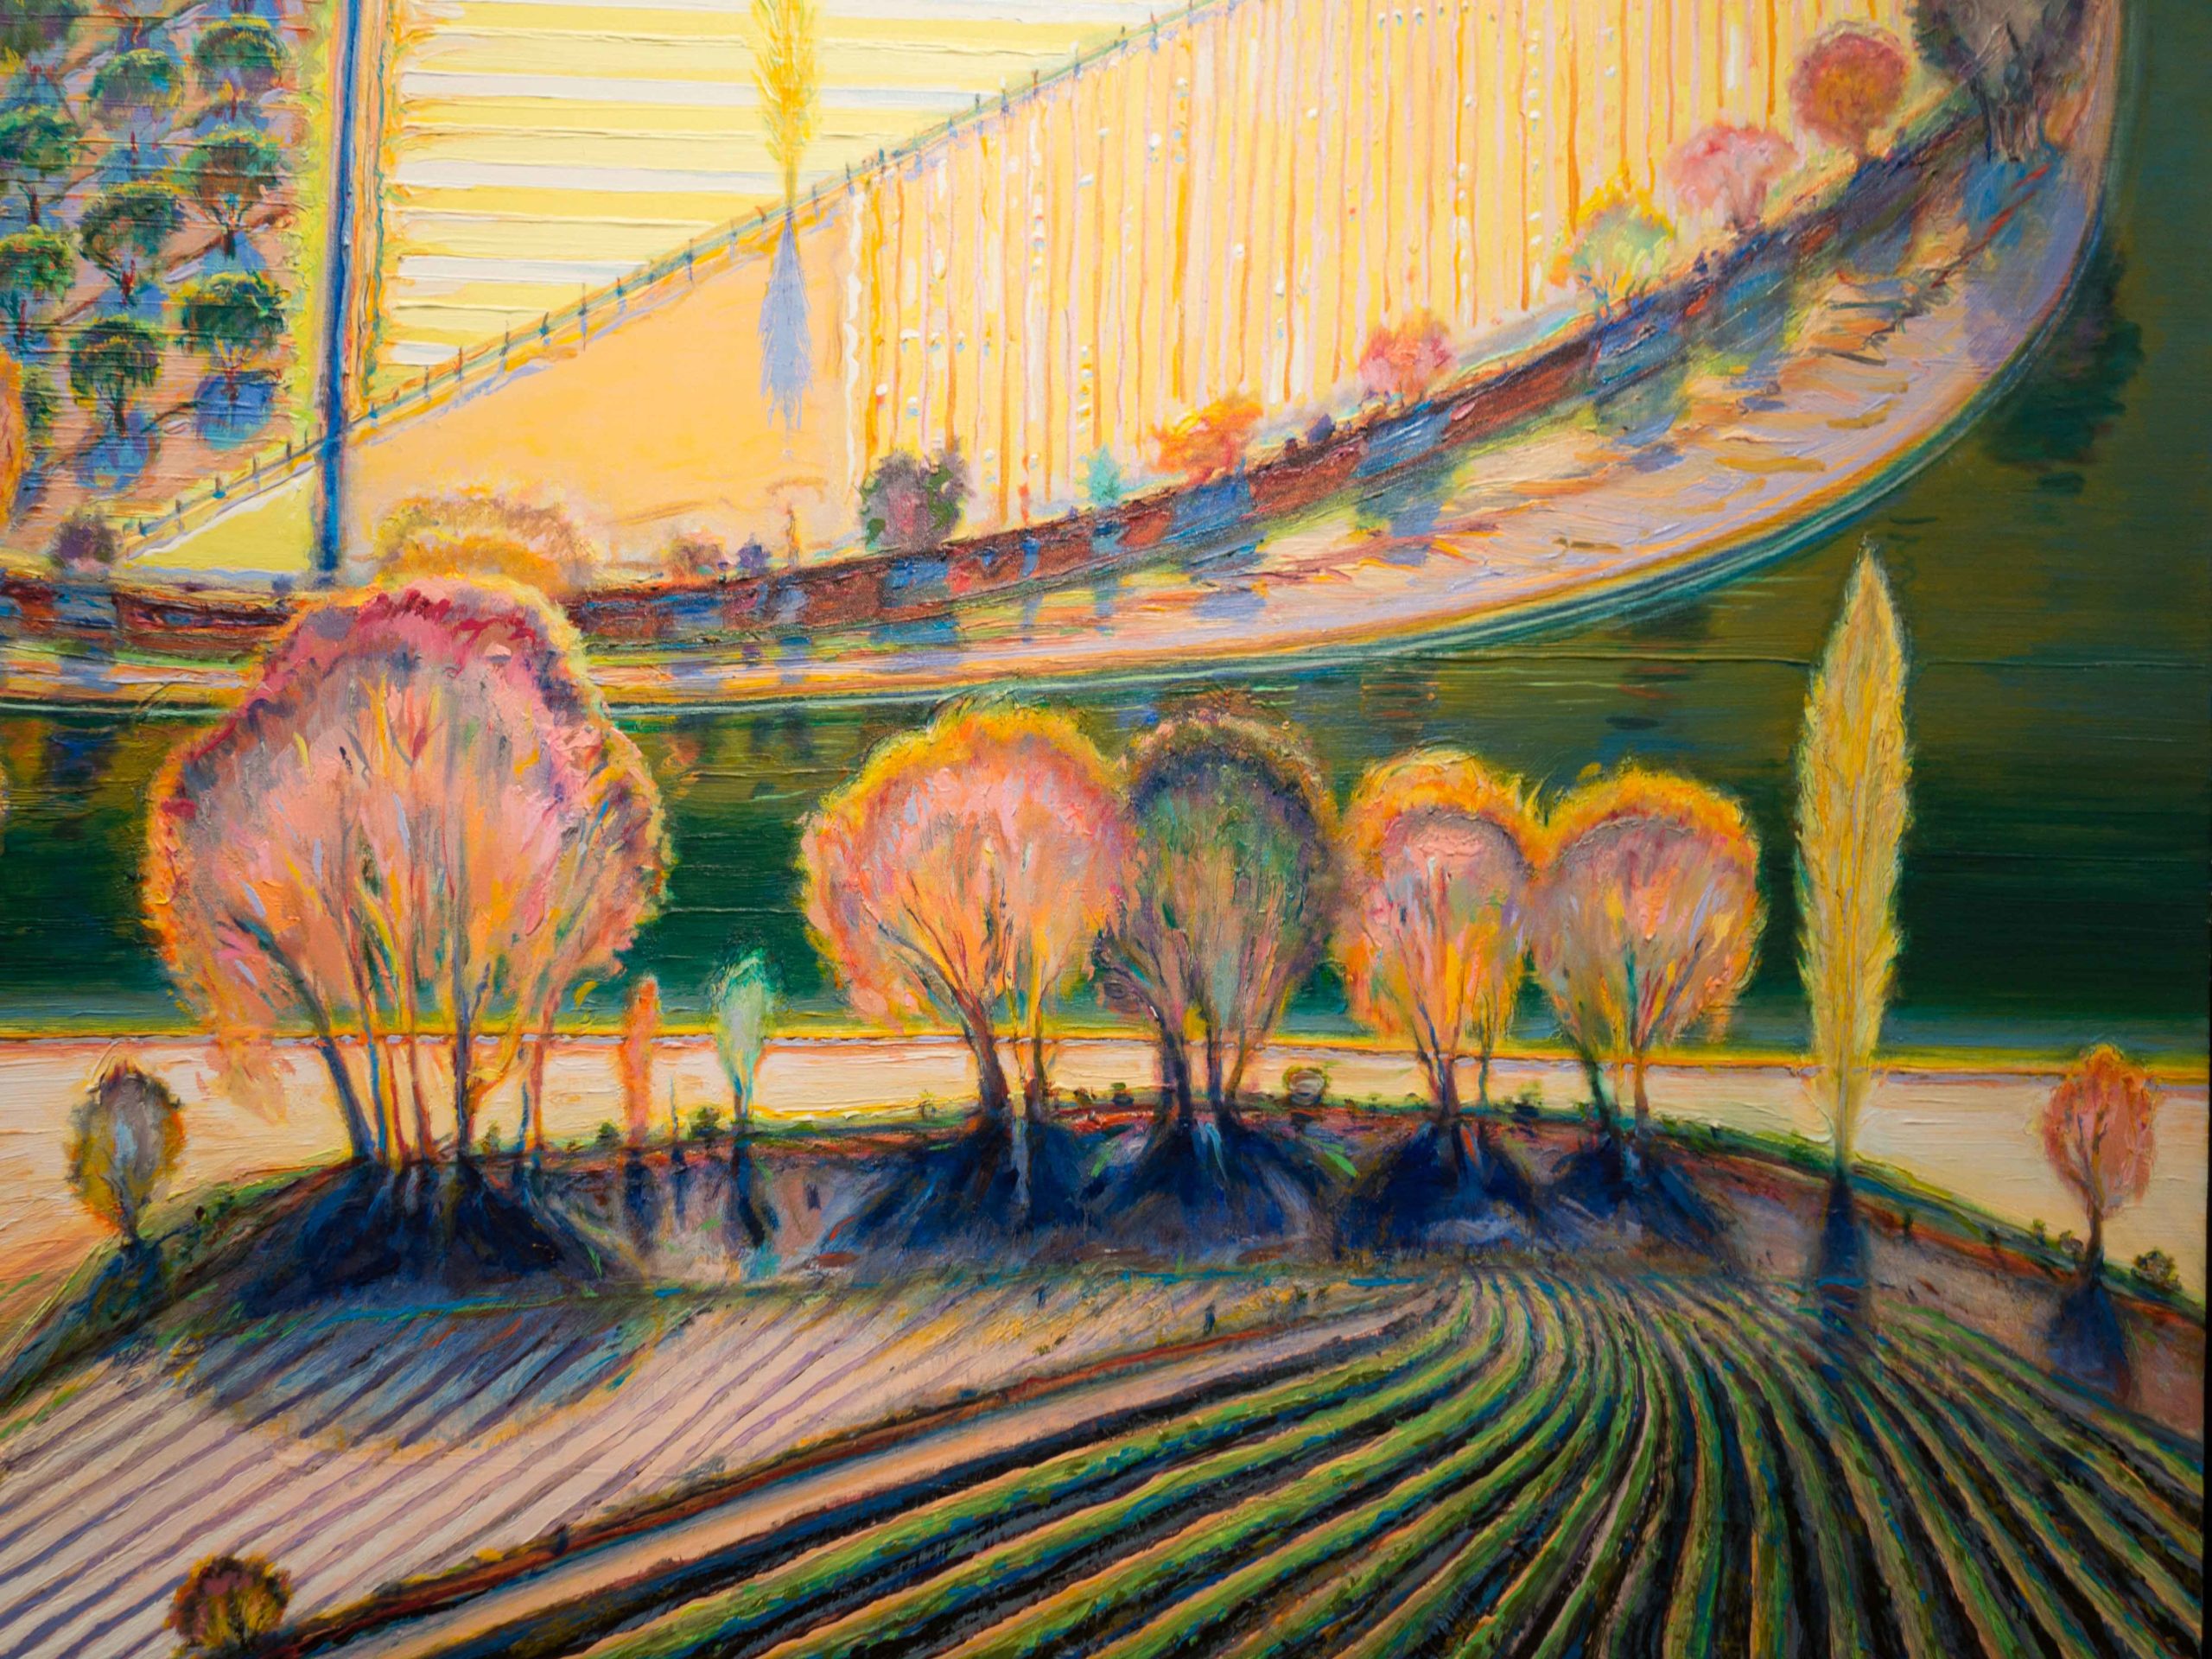 Wayne Thiebaud, Green River Lands (detail), 1998, oil on canvas, 72 x 48 inches.